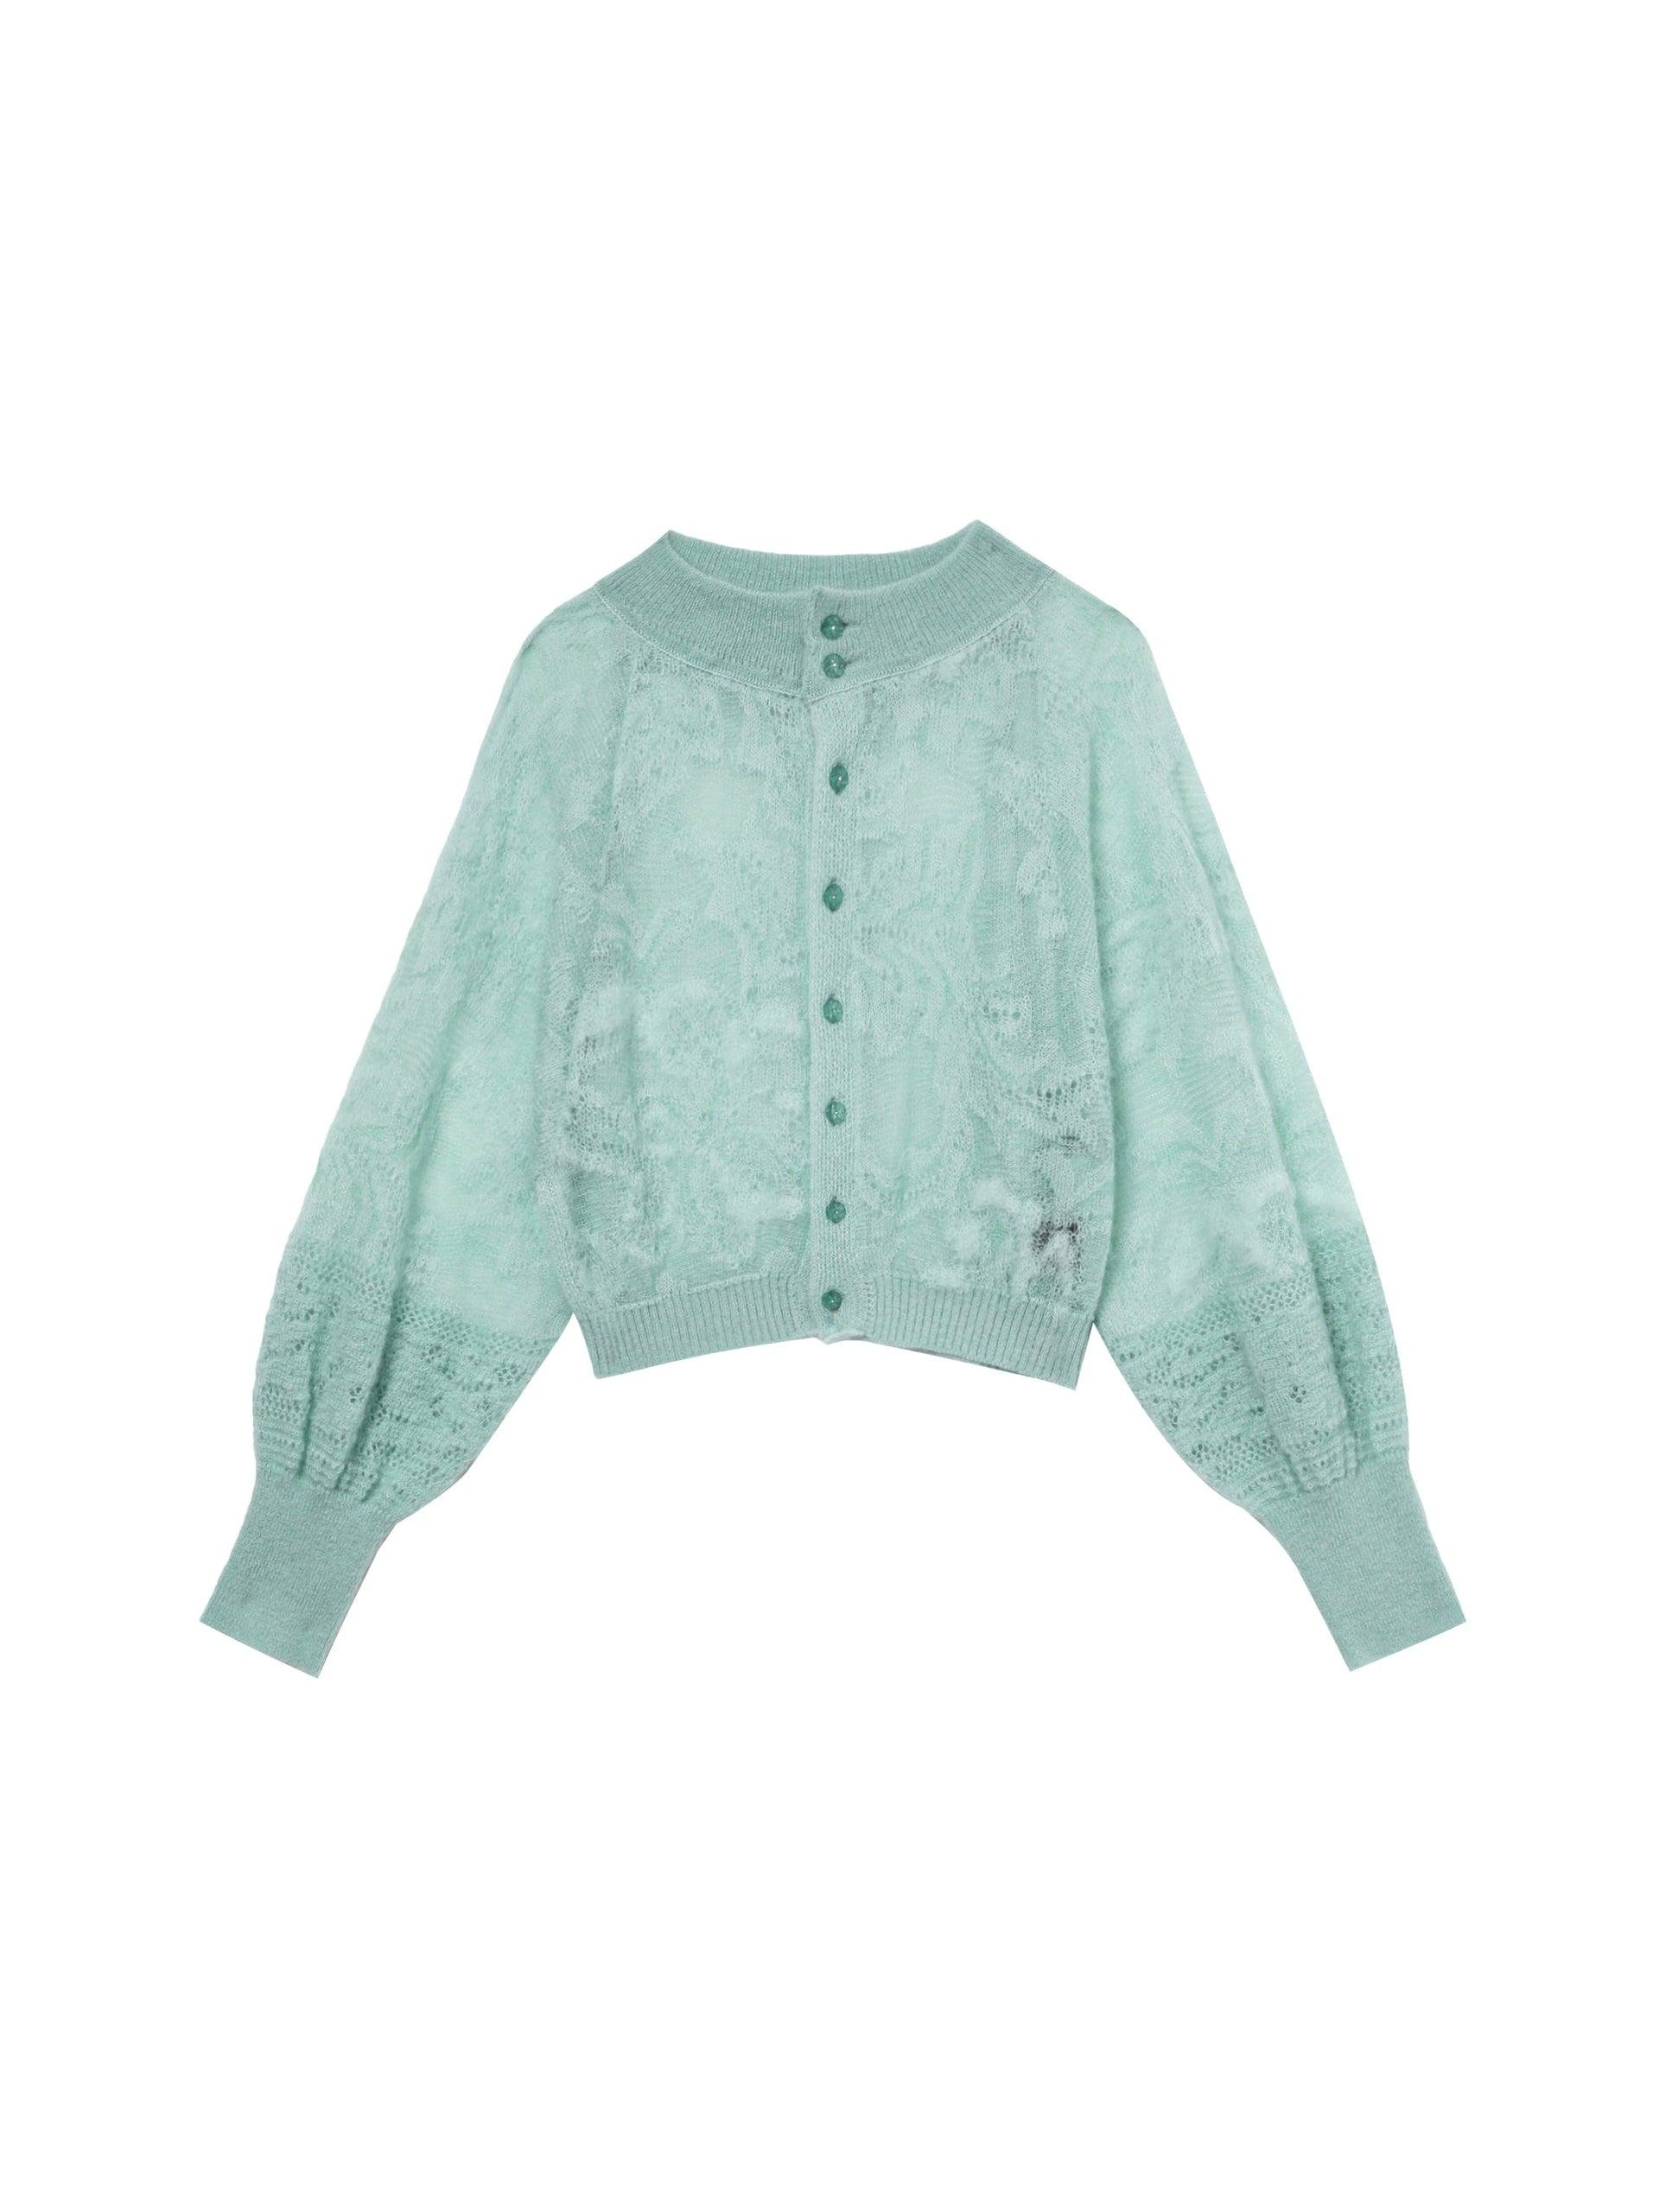 BOUSSOLE Pointelle Lace 2 Way Cardigan by COCKTAIL